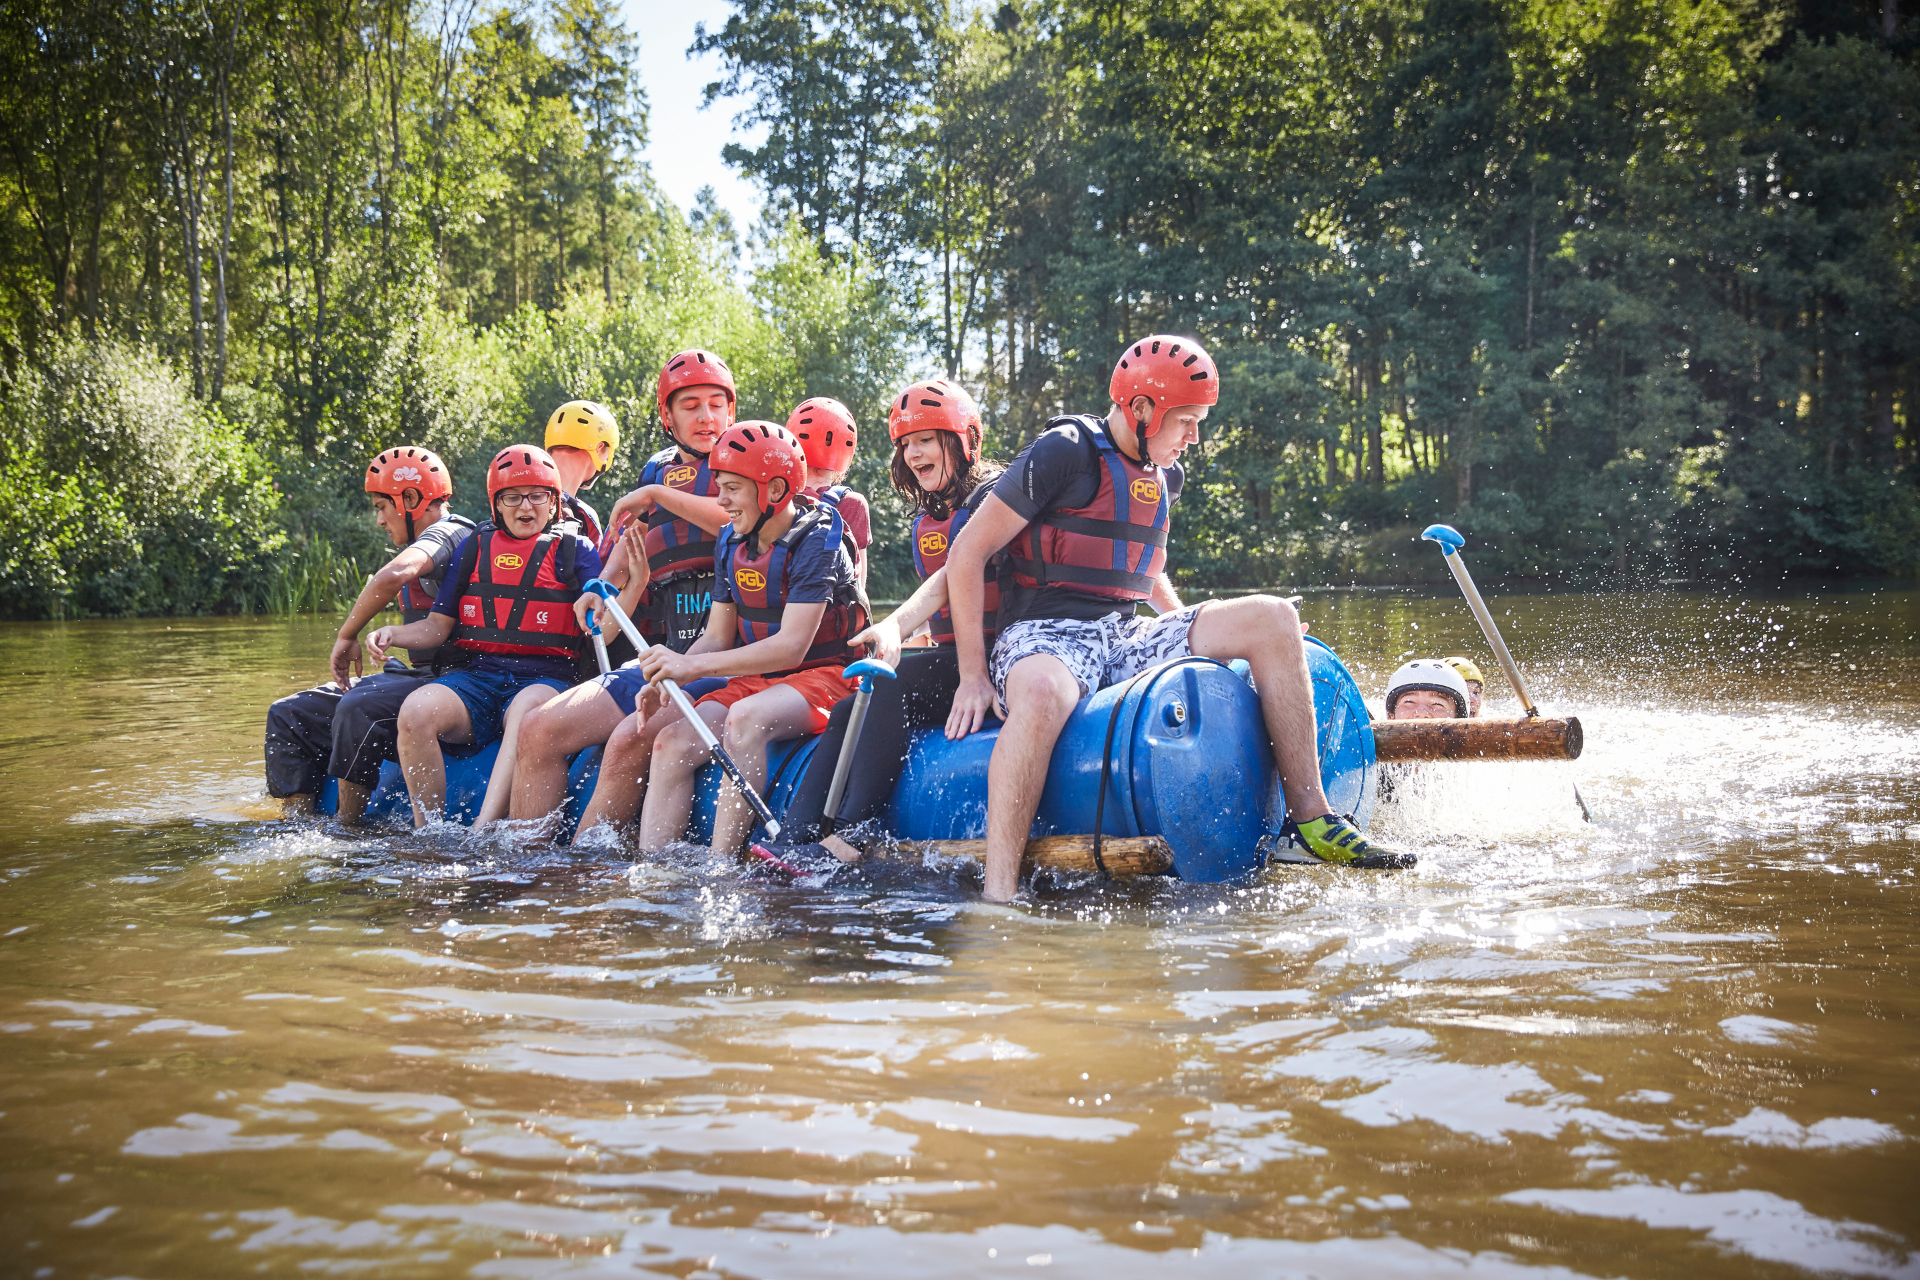 6 Adventurous Ideas for Scout Activities With Your Group